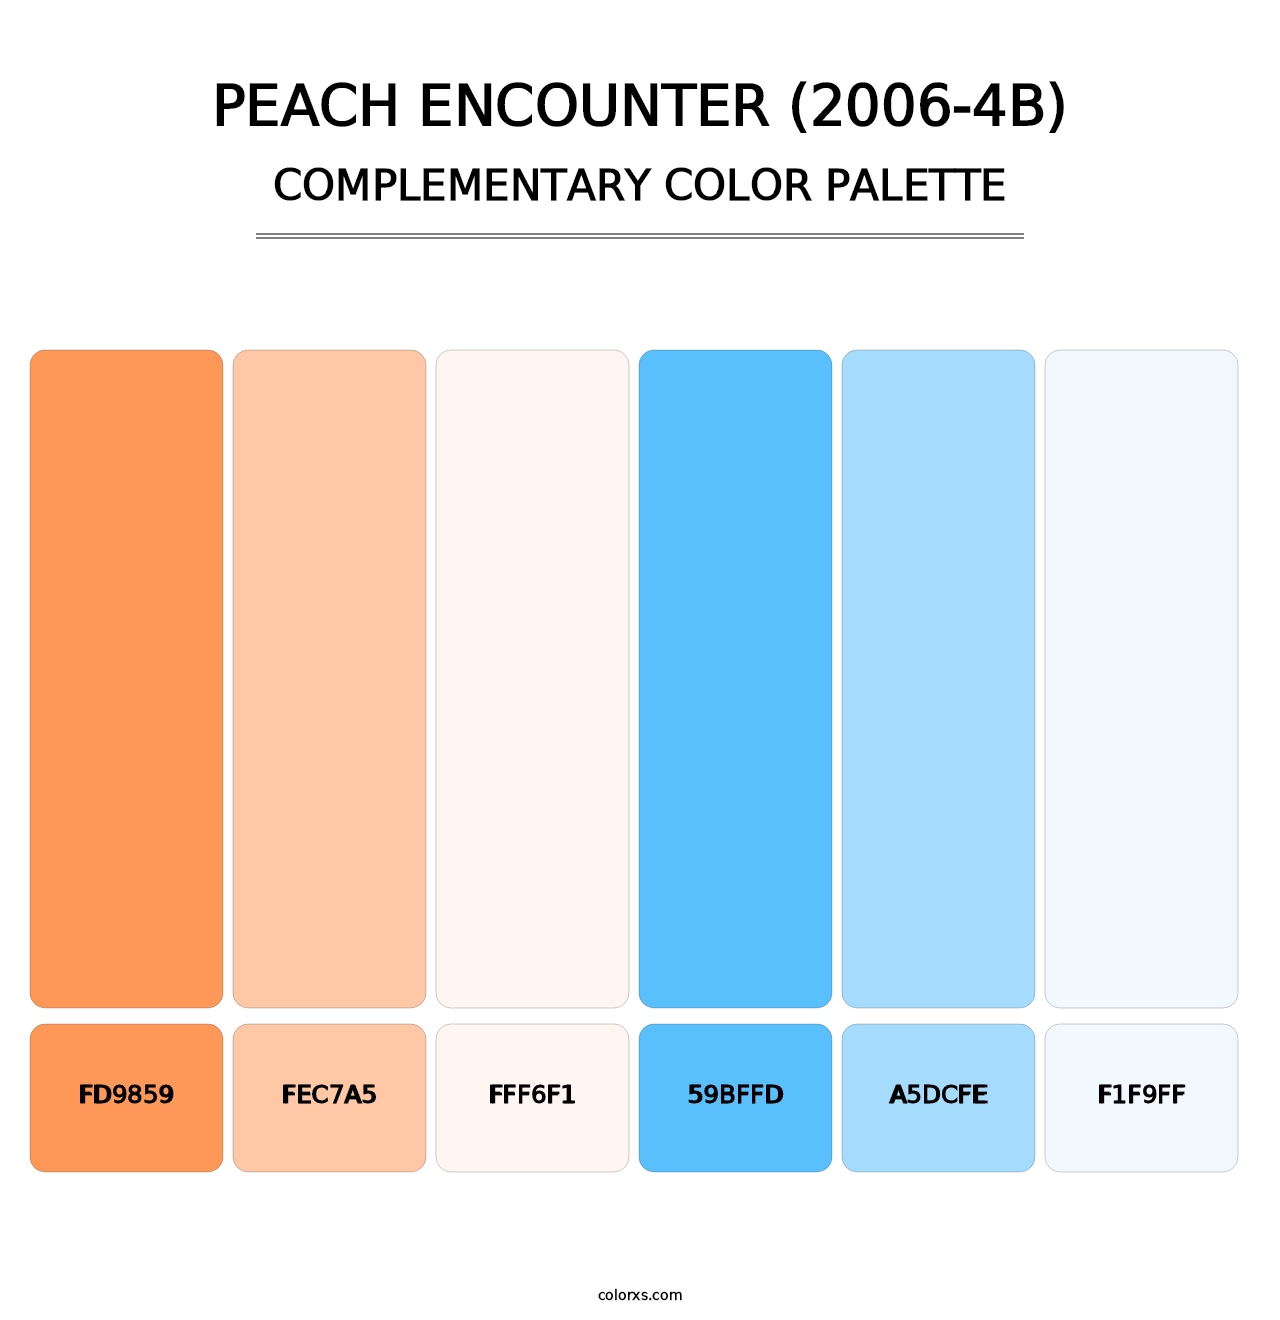 Peach Encounter (2006-4B) - Complementary Color Palette